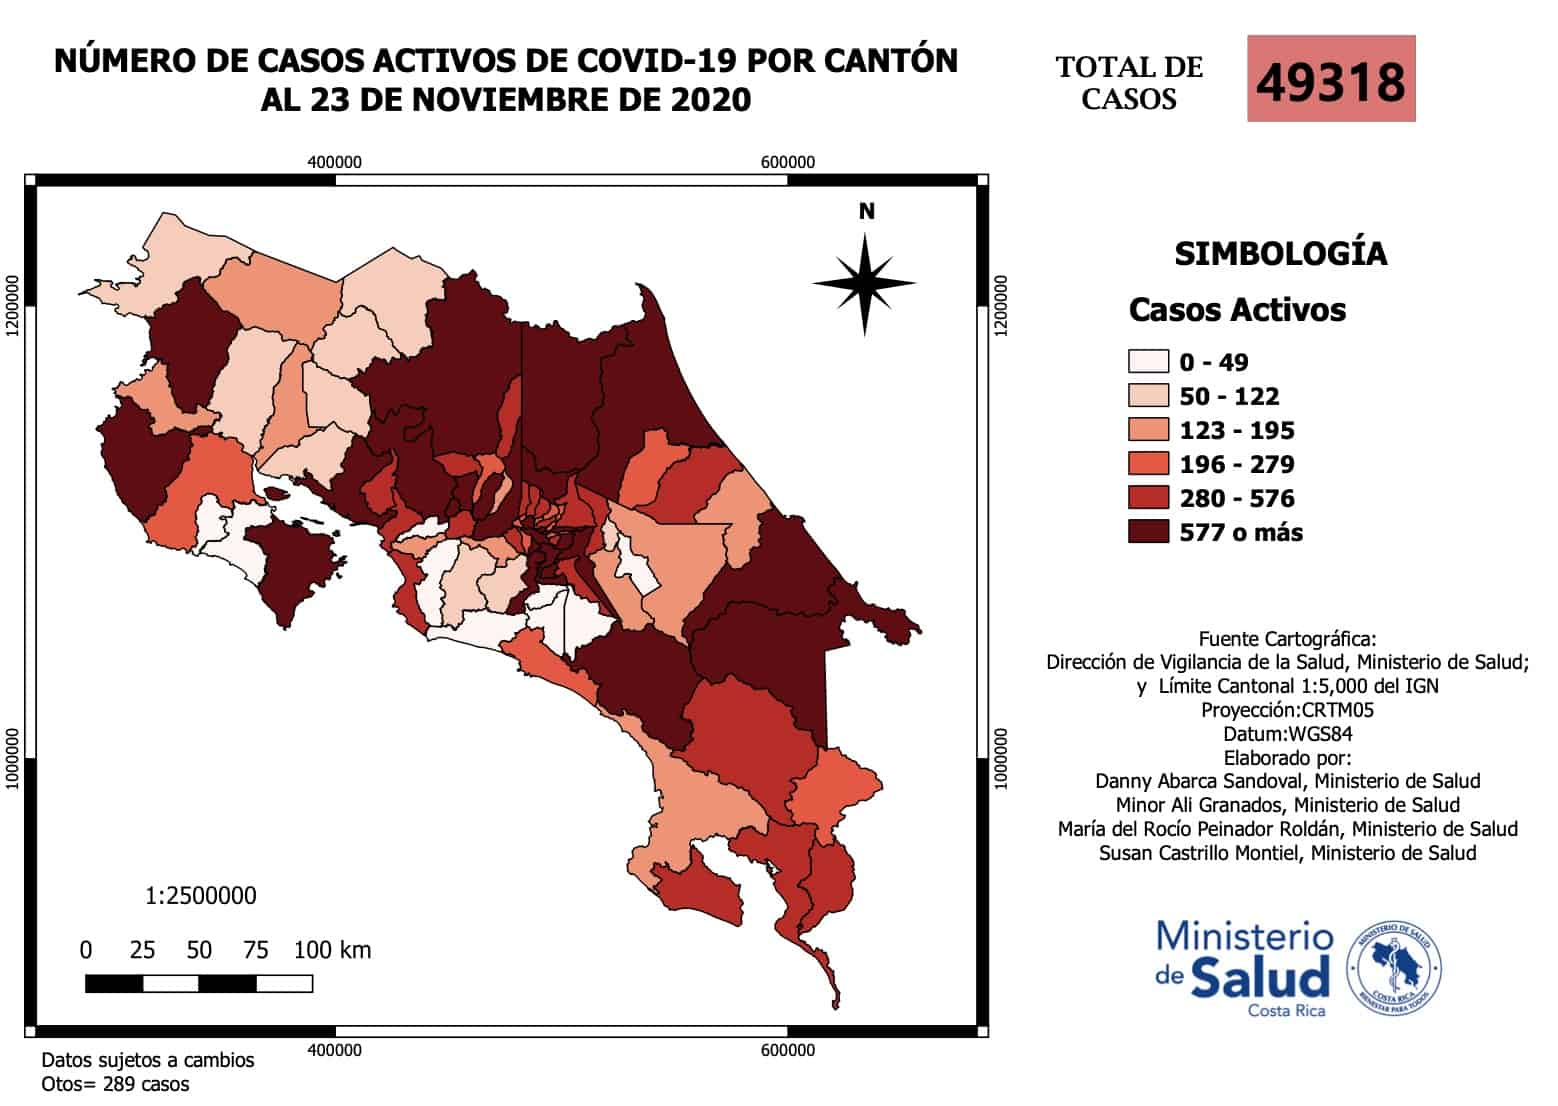 A map showing Costa Rica's active coronavirus cases by canton.